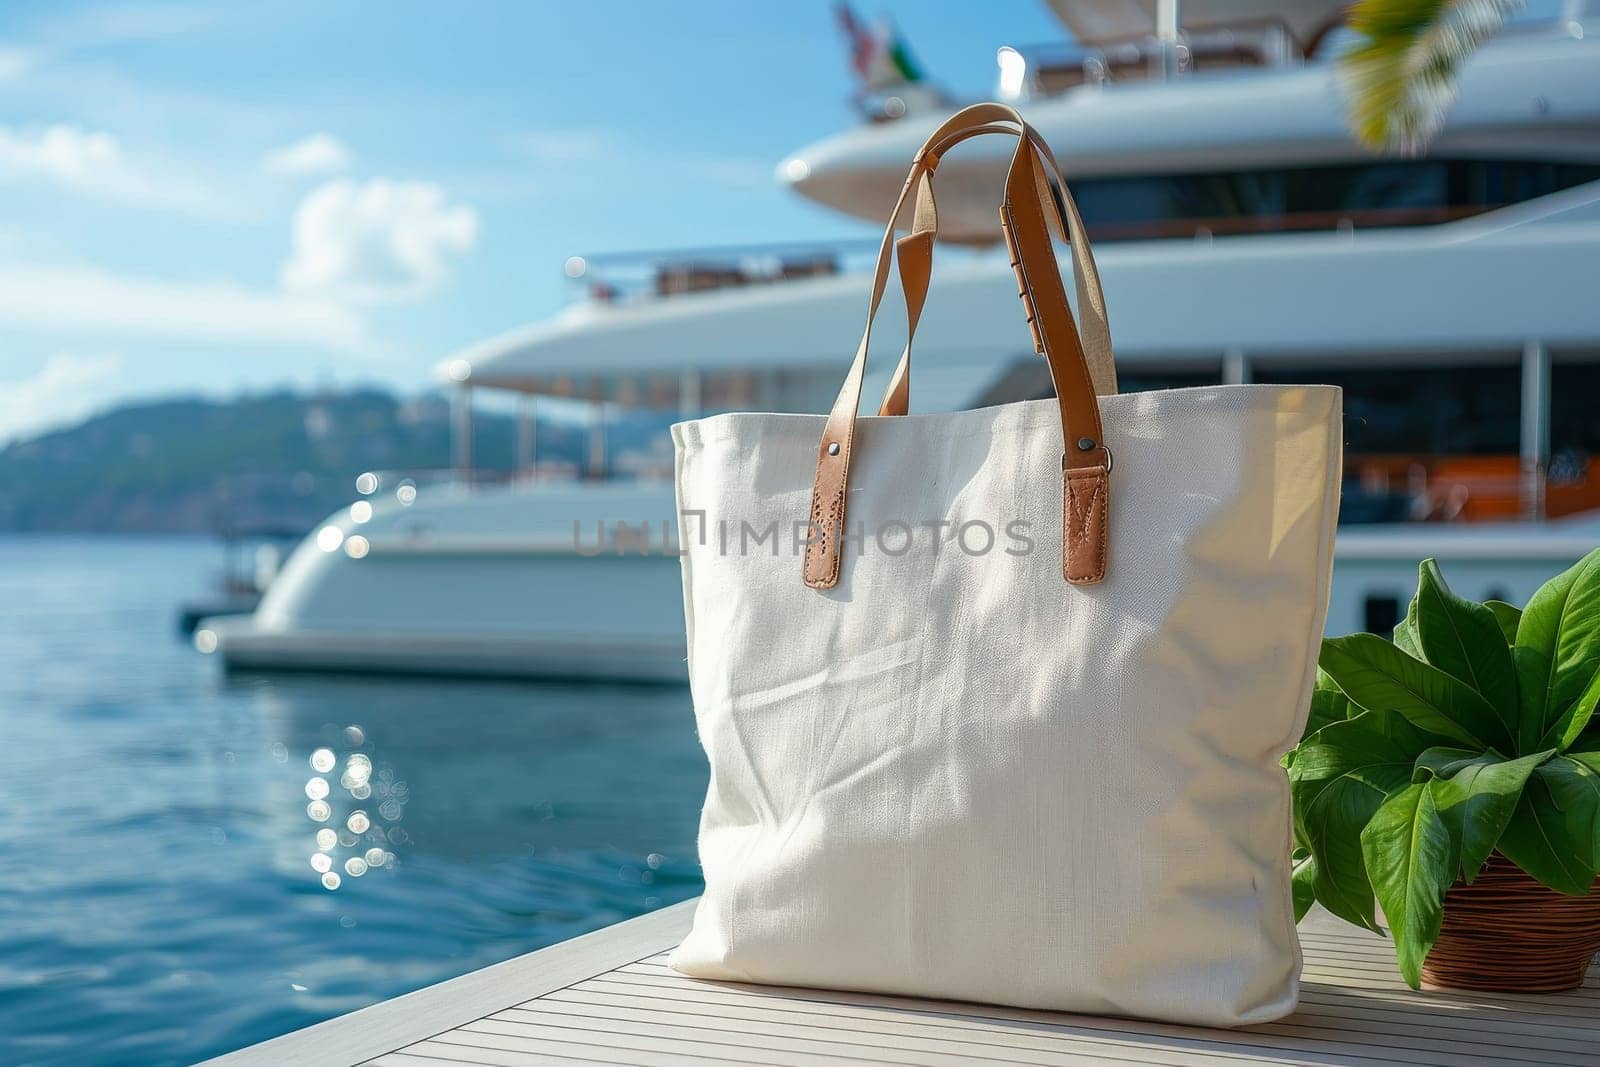 A white purse is sitting on a table next to a boat by itchaznong